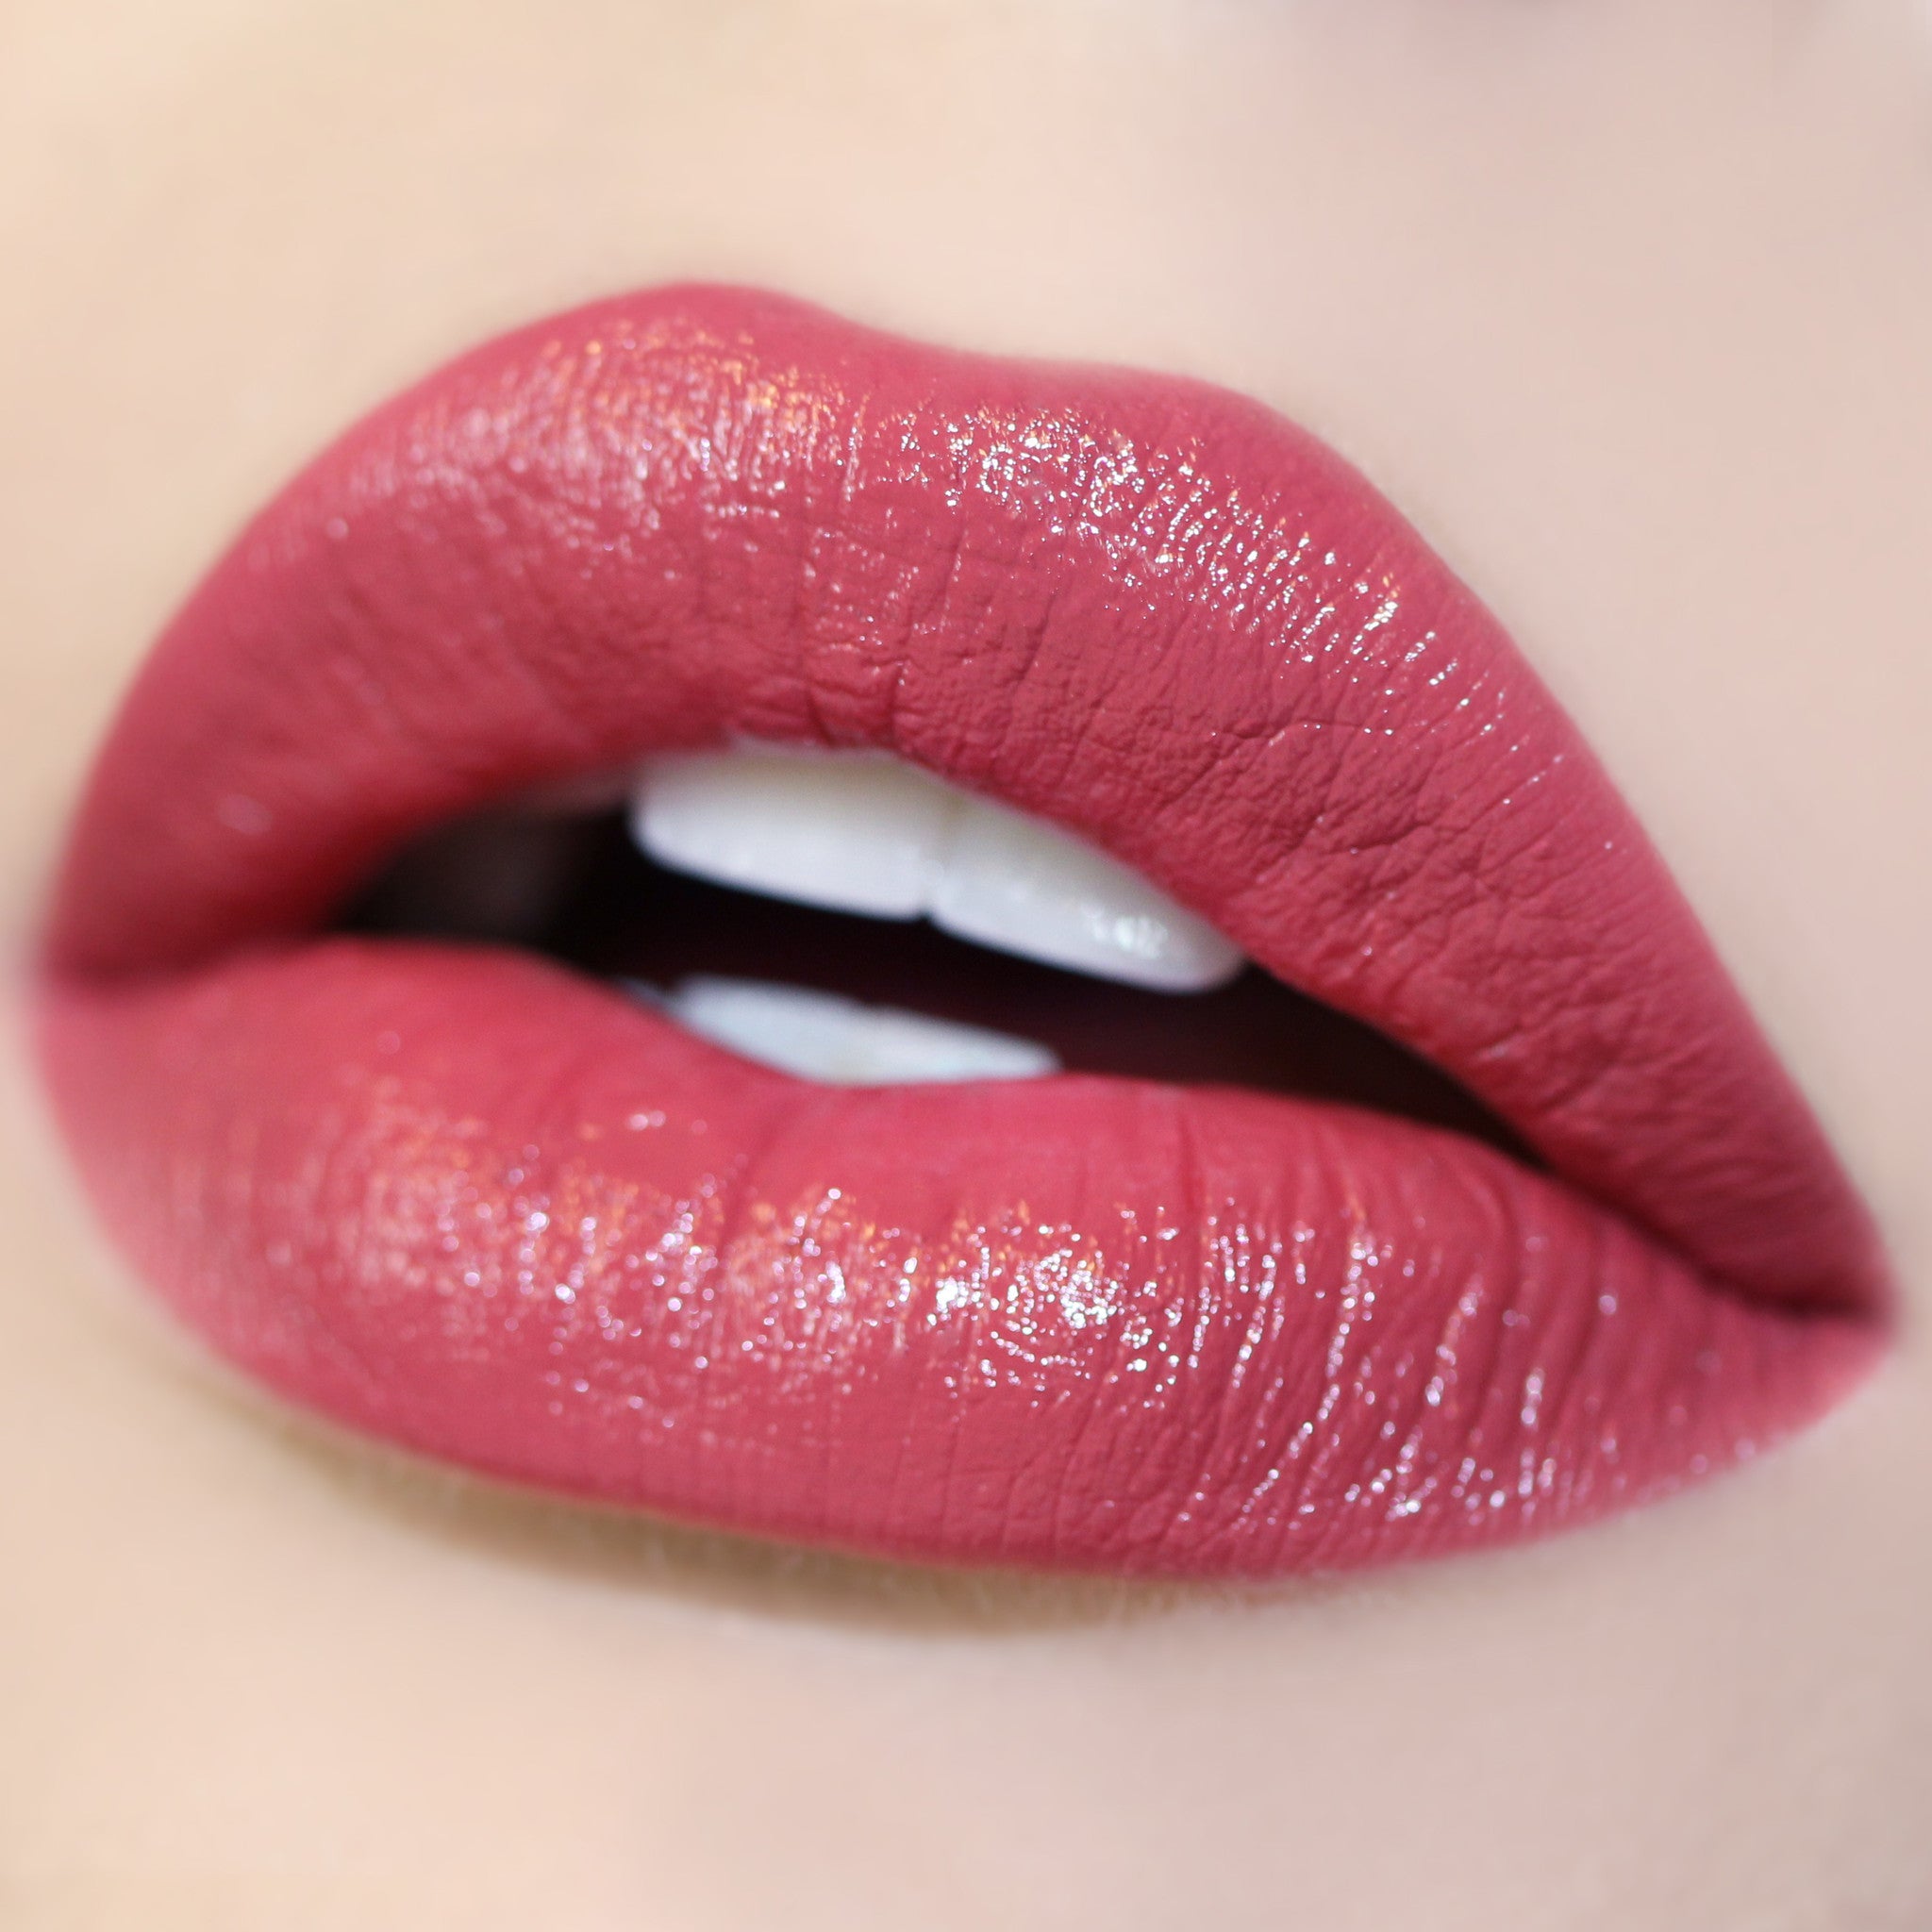 Chanel Rouge Allure Velvet Extreme Review - Reviews and Other Stuff